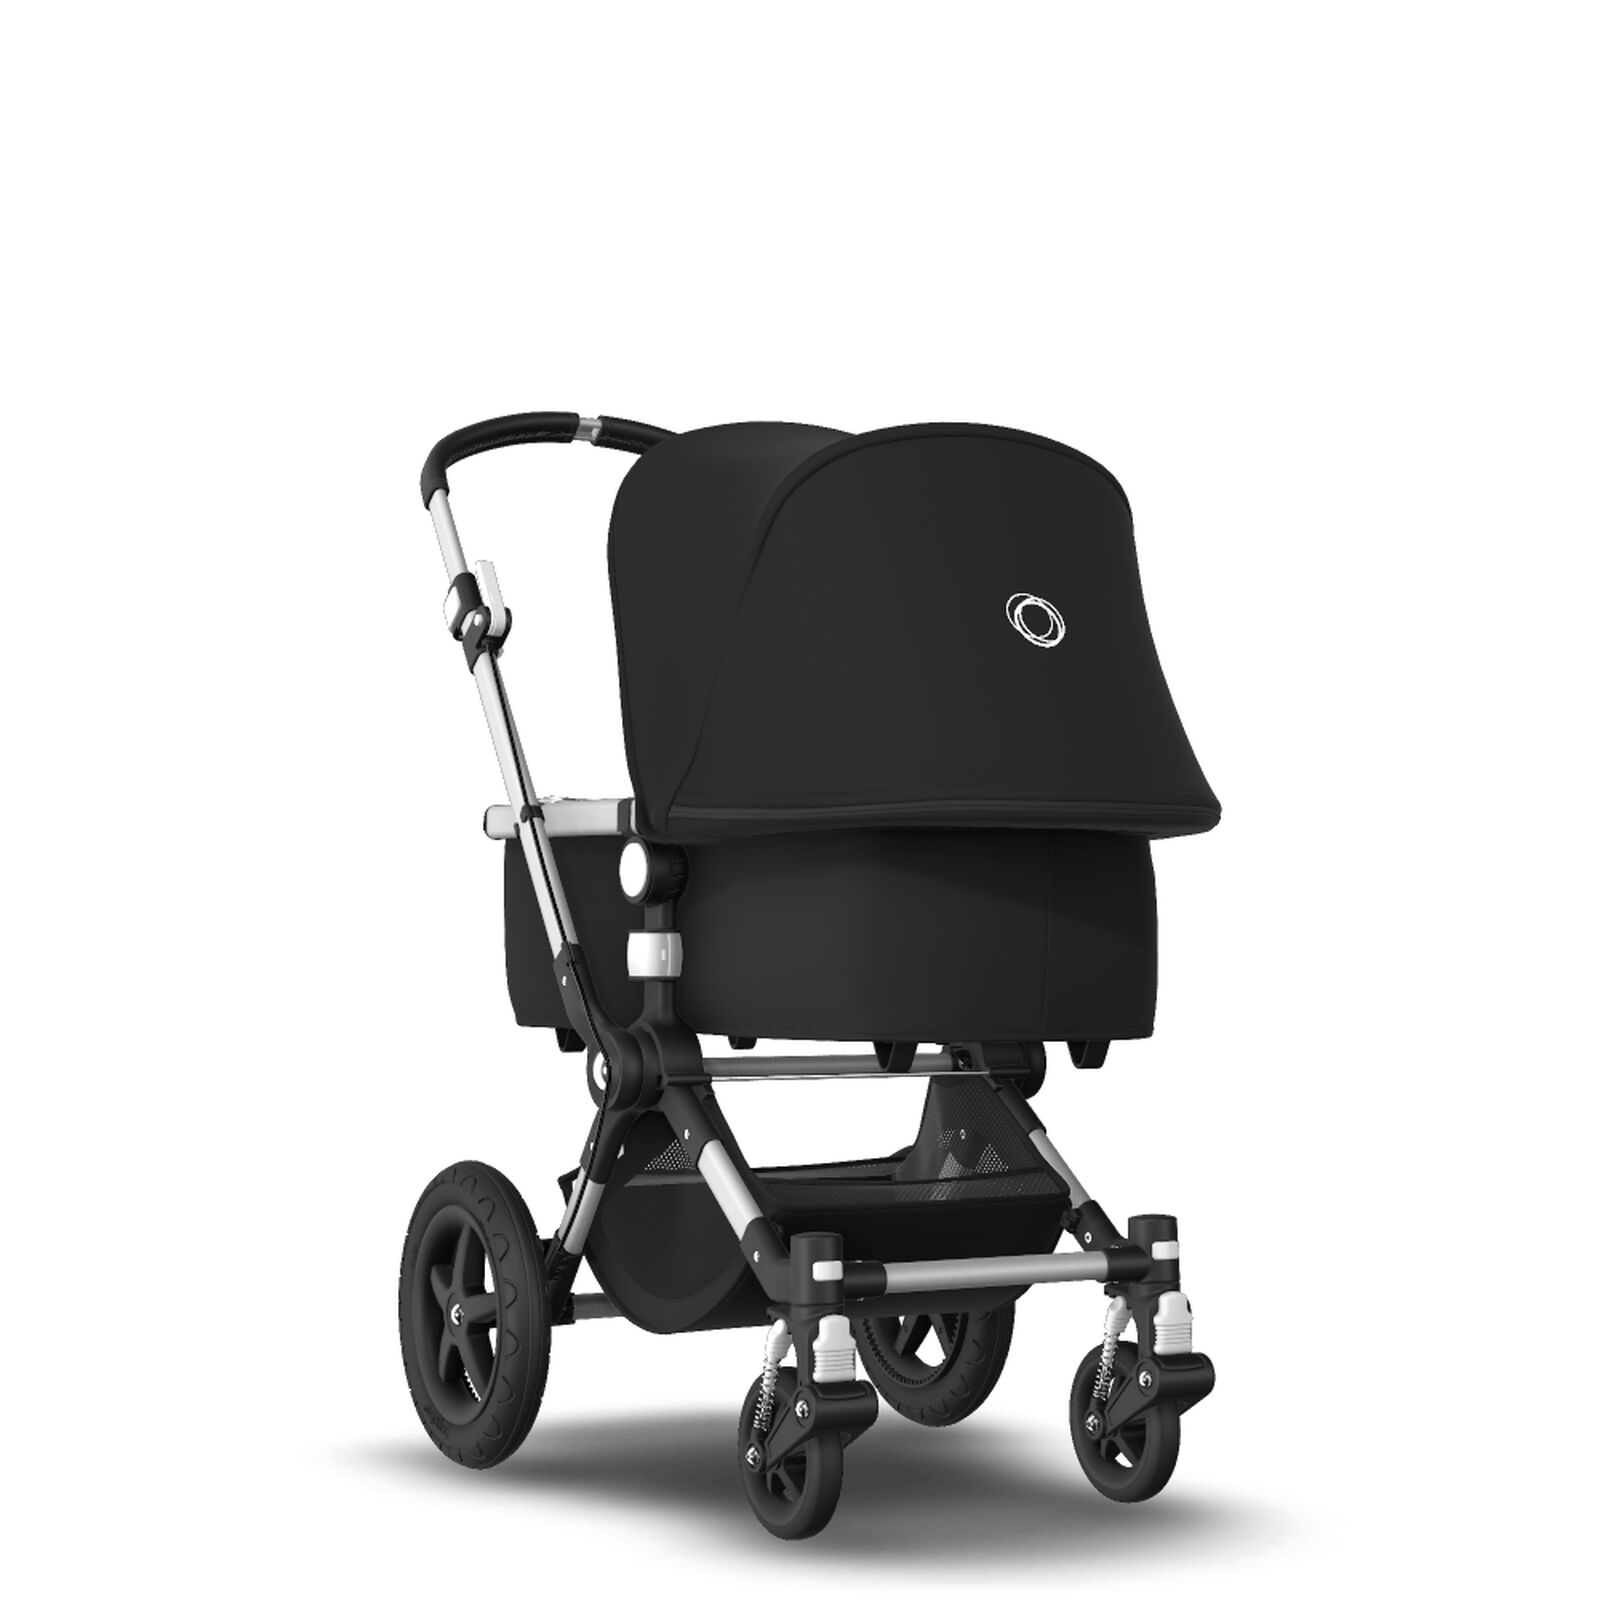 Bugaboo Cameleon 3 Plus Travel Systems - View 1